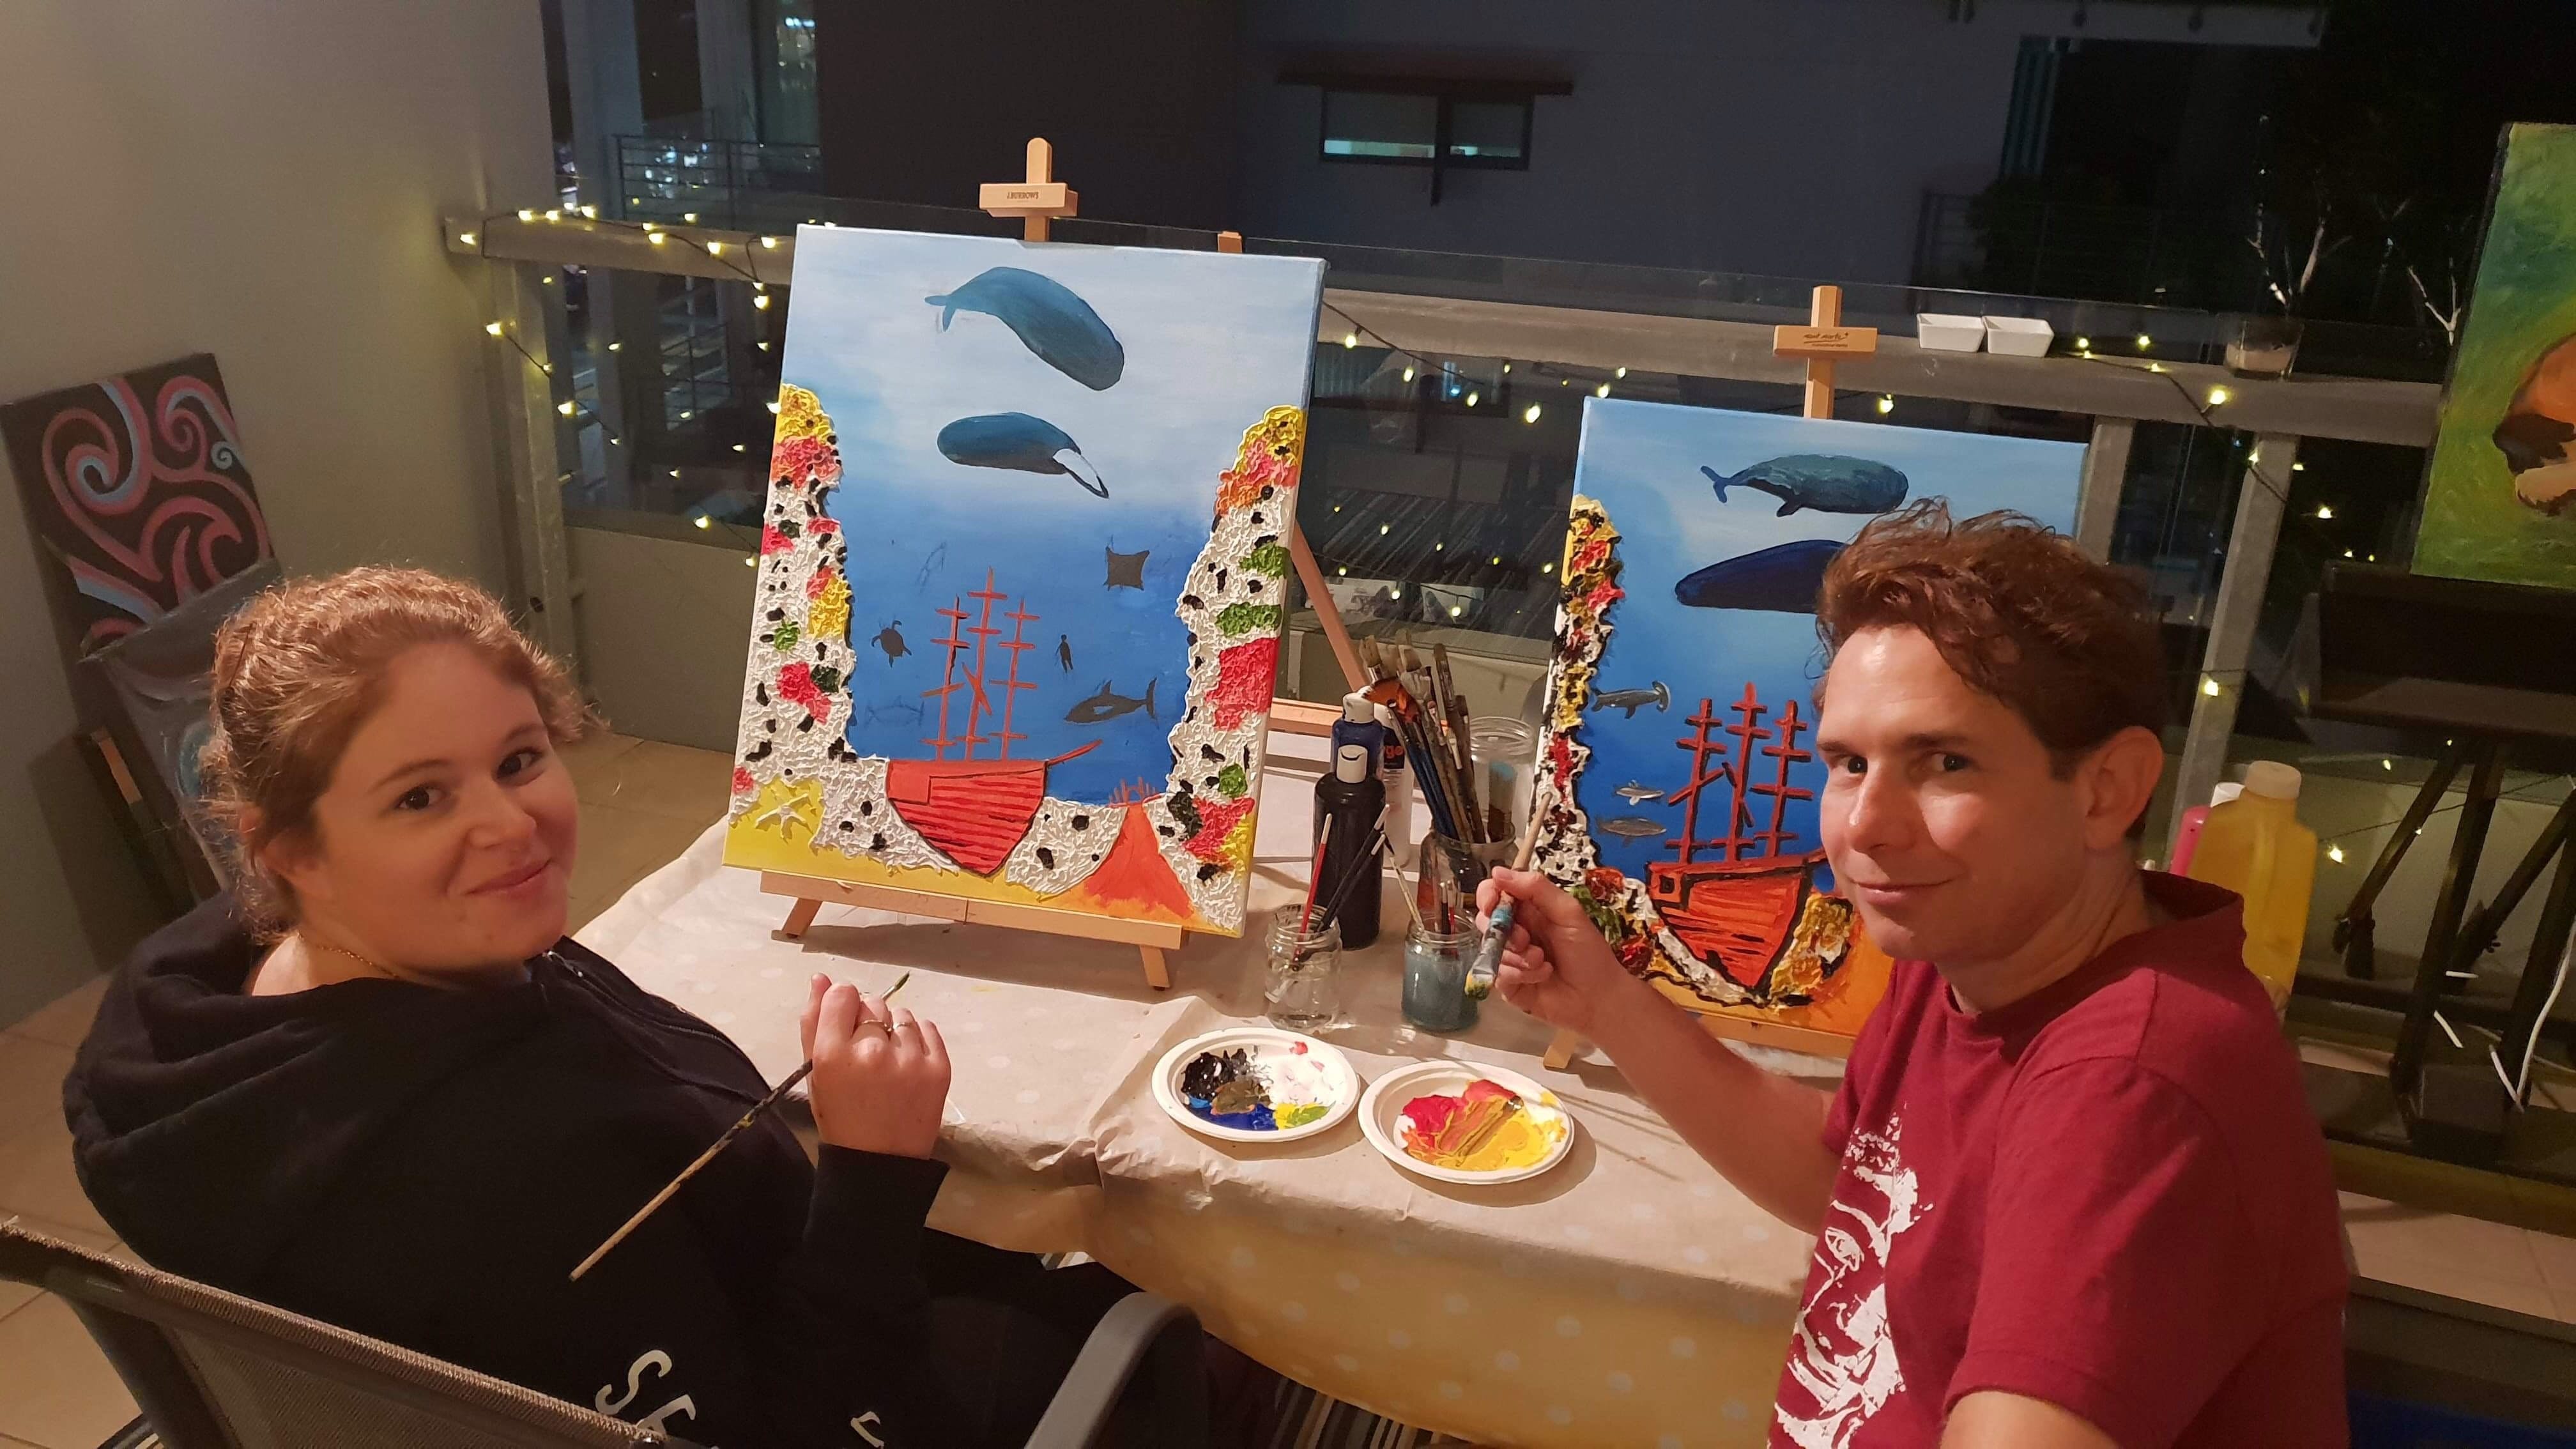 Paint and Sip Social Art Classes 2 for 1 - Accommodation Mount Tamborine